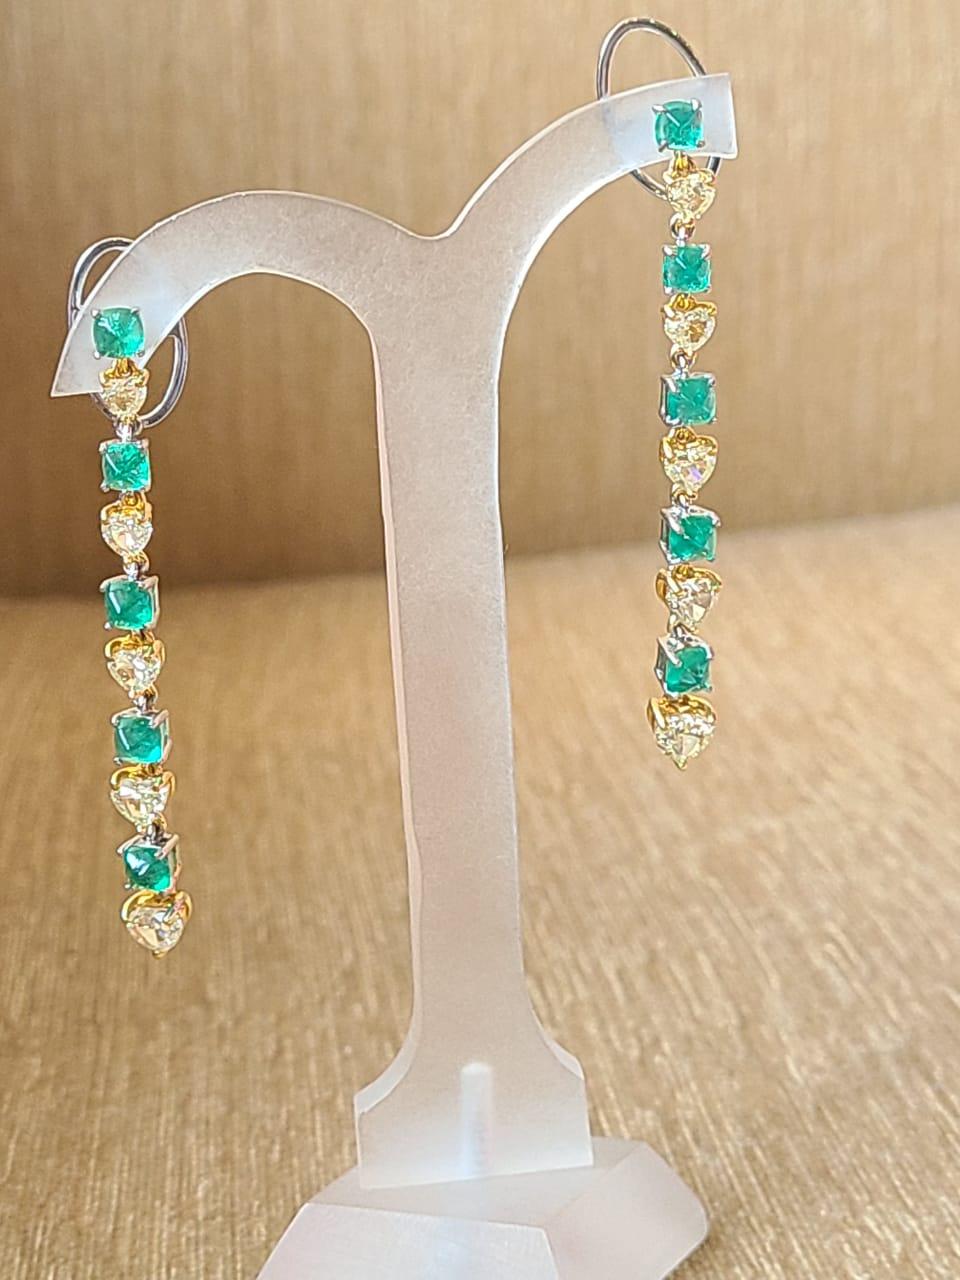 Sugarloaf Cabochon Natural, Columbian, sugarloaf Emerald & Yellow Diamonds Chandelier Earrings